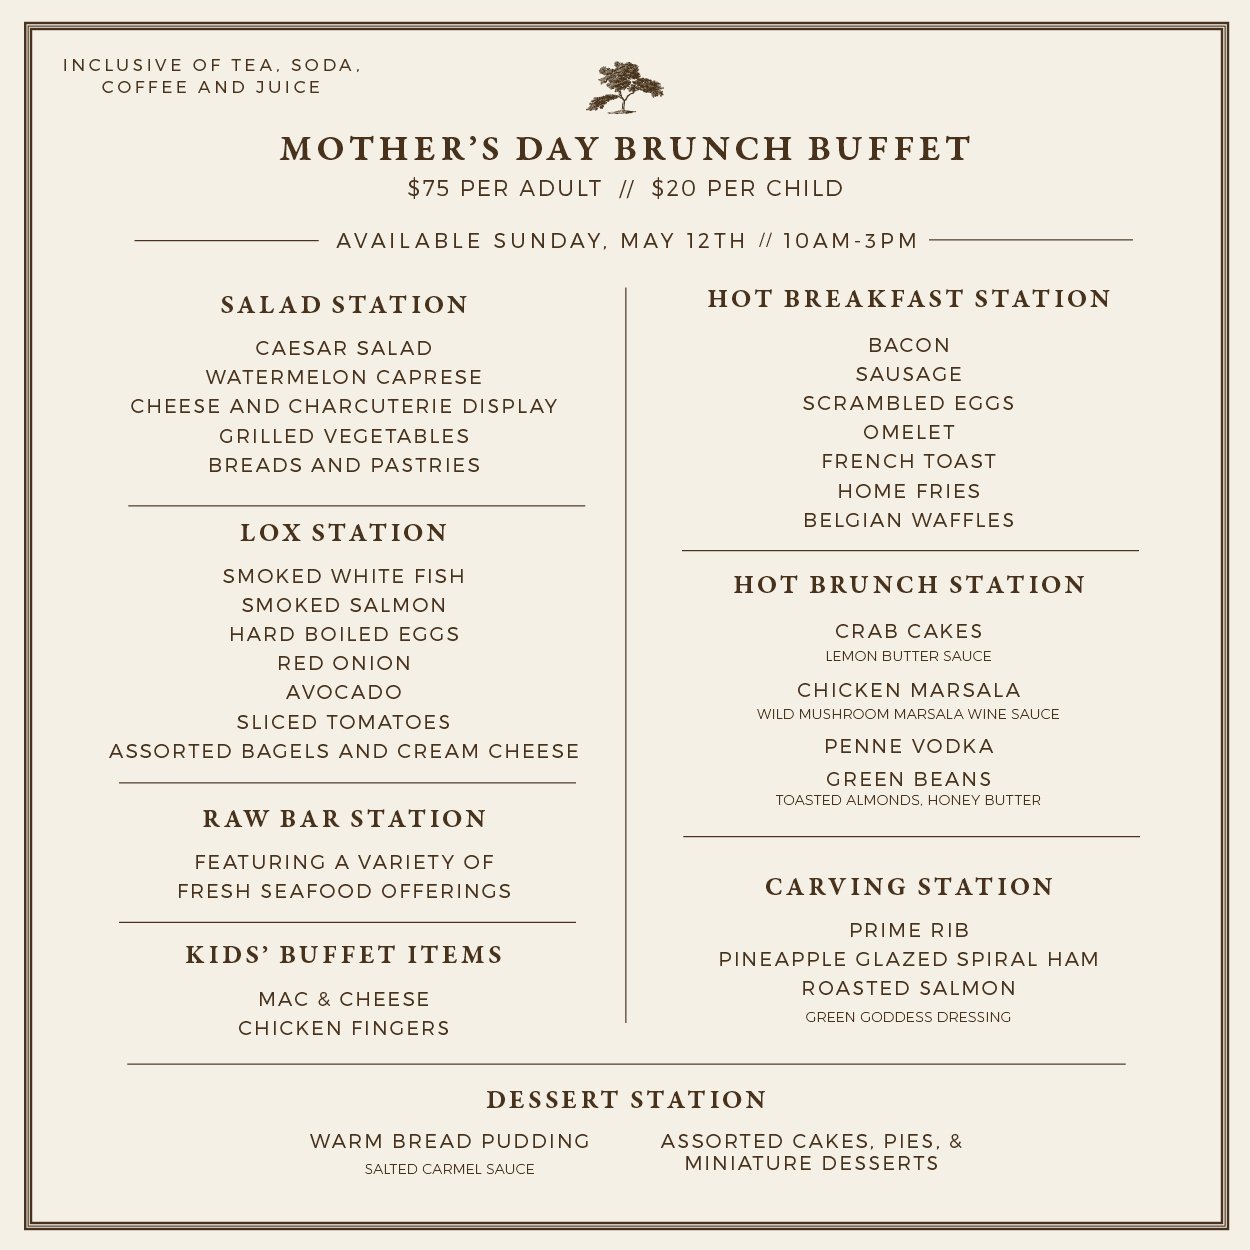 #MothersDay is right around the corner - do you have your reservations? 🍴